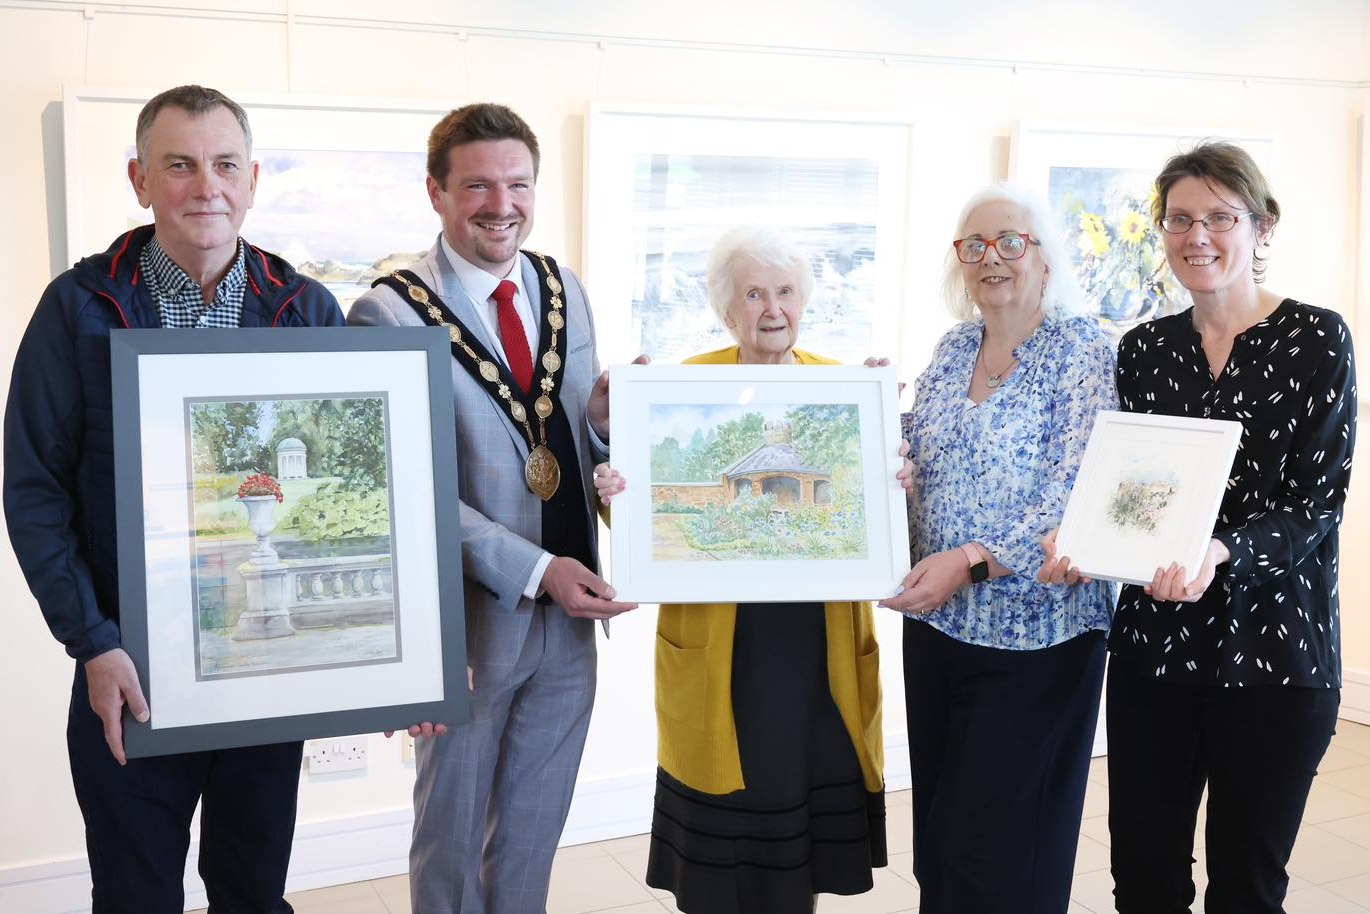 Commemorative ‘Coronation’ arts projects in Lisburn & Castlereagh are celebrated at special event